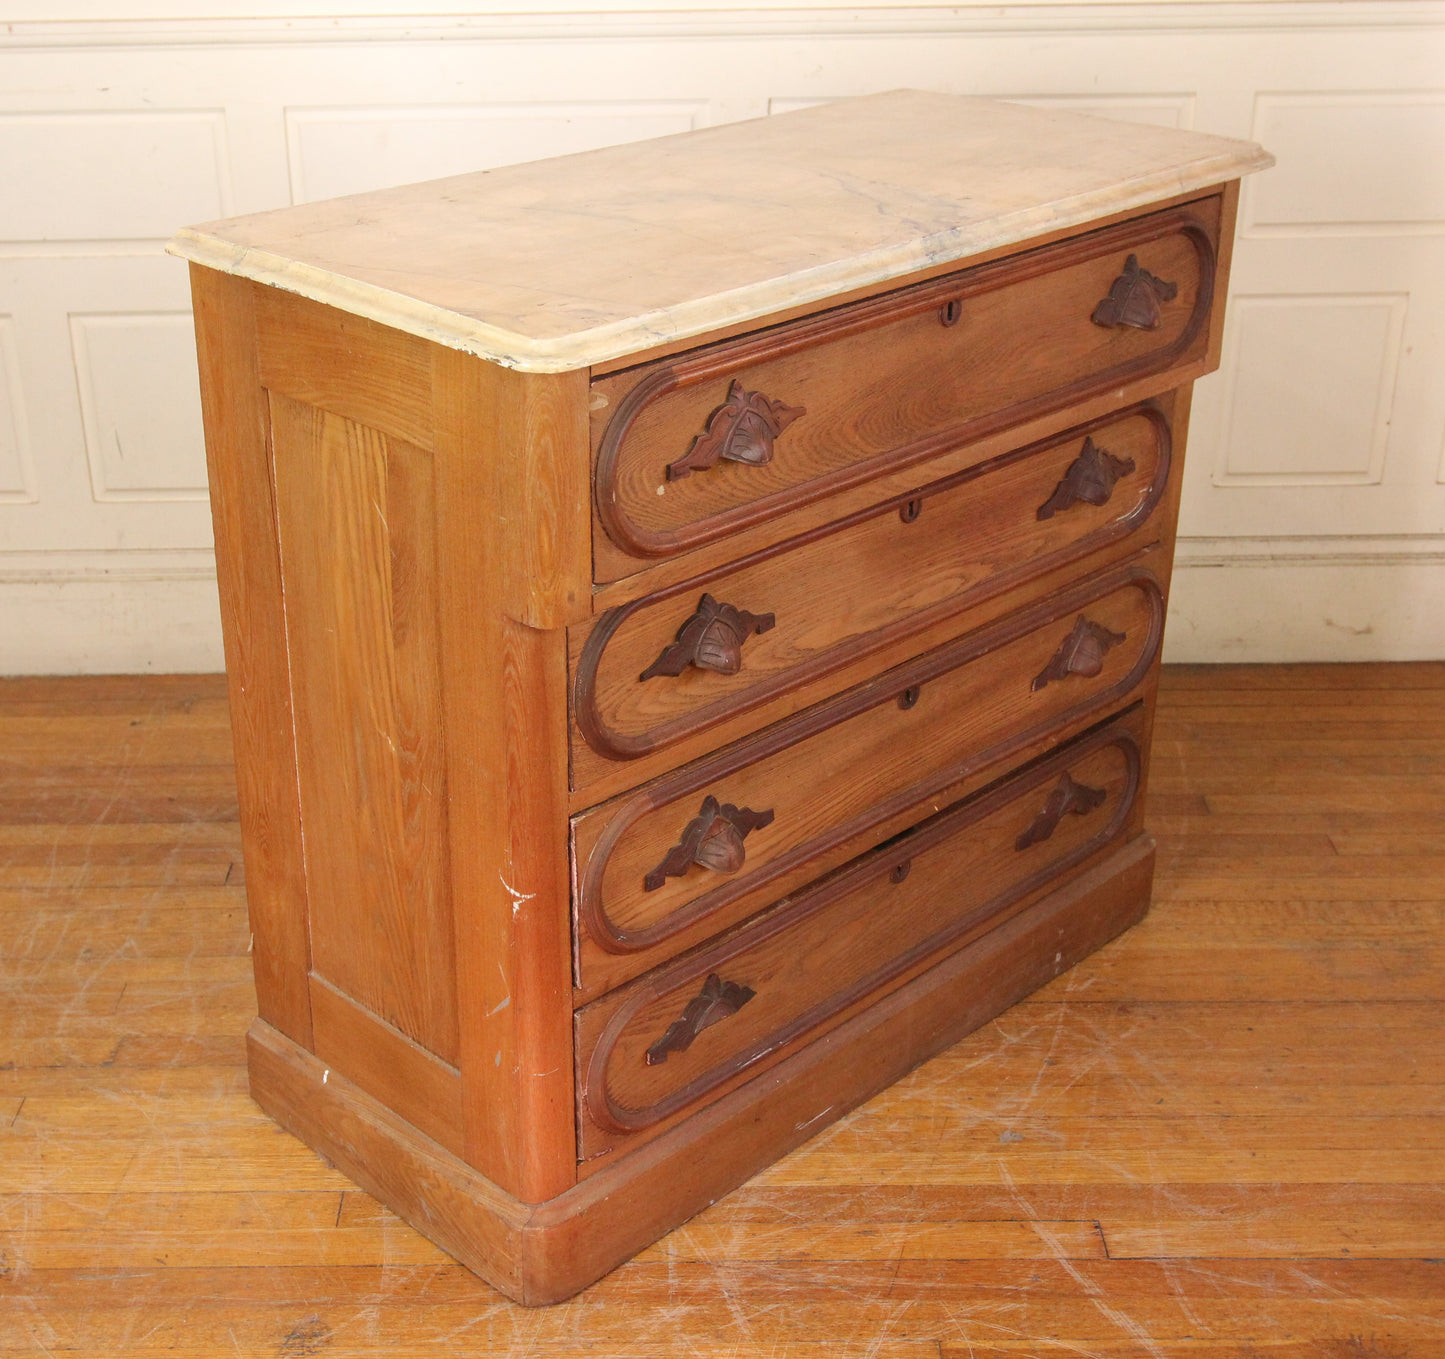 Four Drawer Country Pine Dresser with Faux-Marble Top